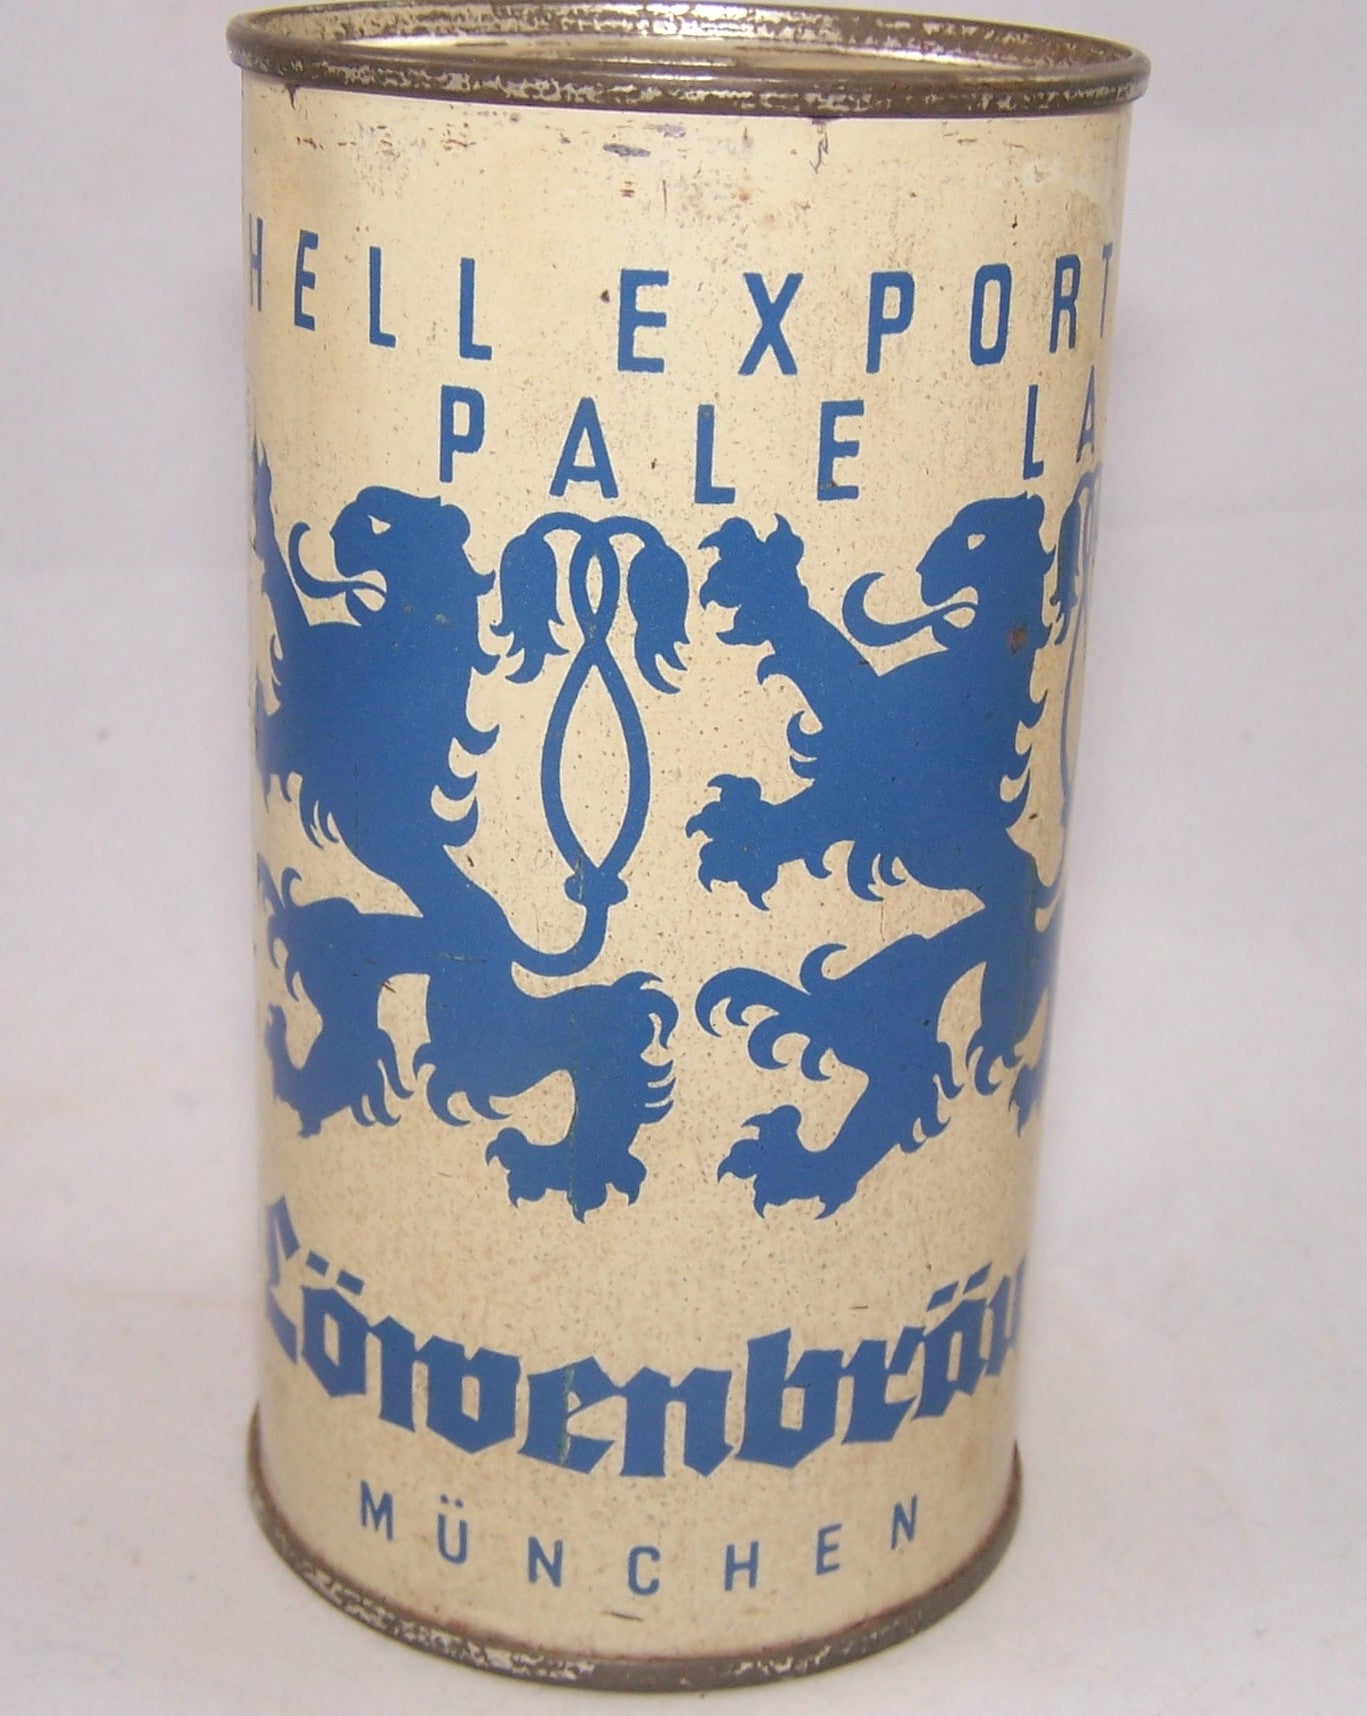 Lowenbrau Hell Export Pale Lager. Grade 1- Sold on 07/01/17